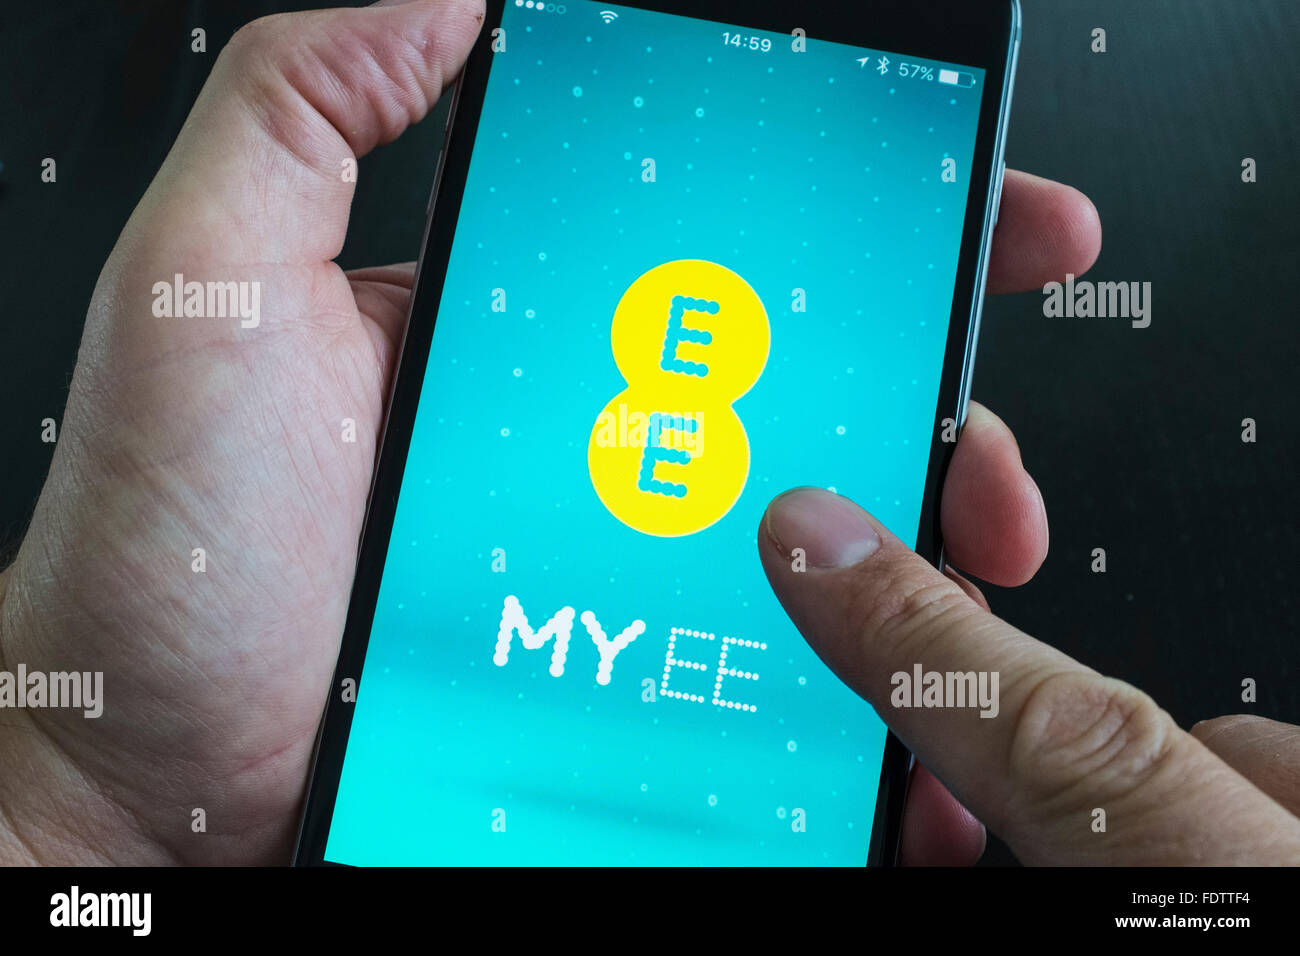 EE mobile phone app on an iPhone 6 Plus smart phone Stock Photo